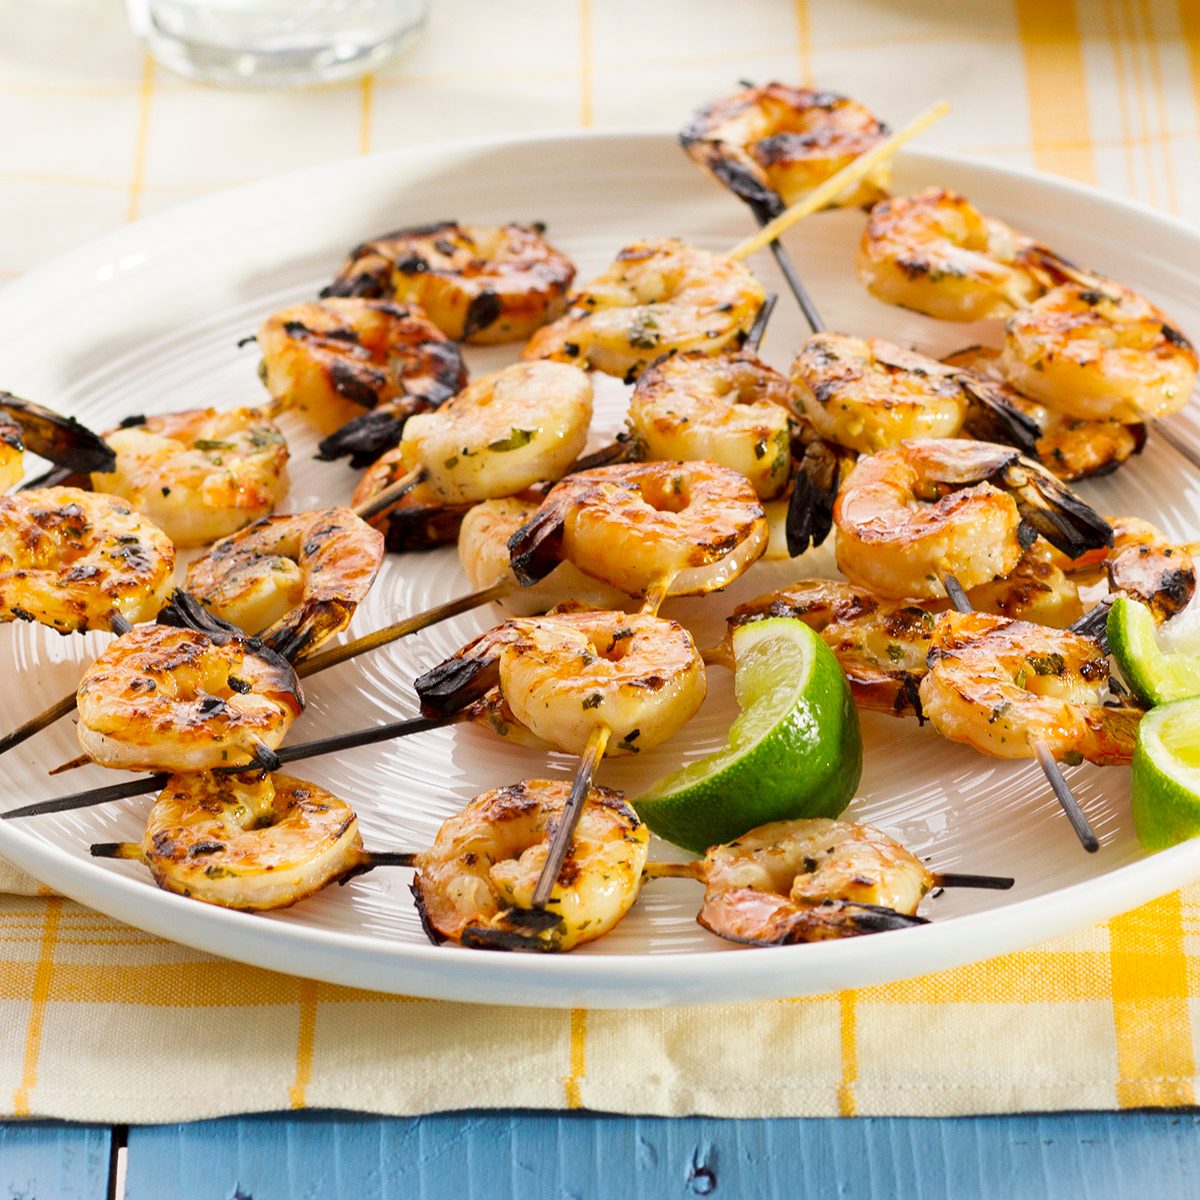 How To Grill Shrimp In 4 Simple Steps Taste Of Home,Cellulose In Food